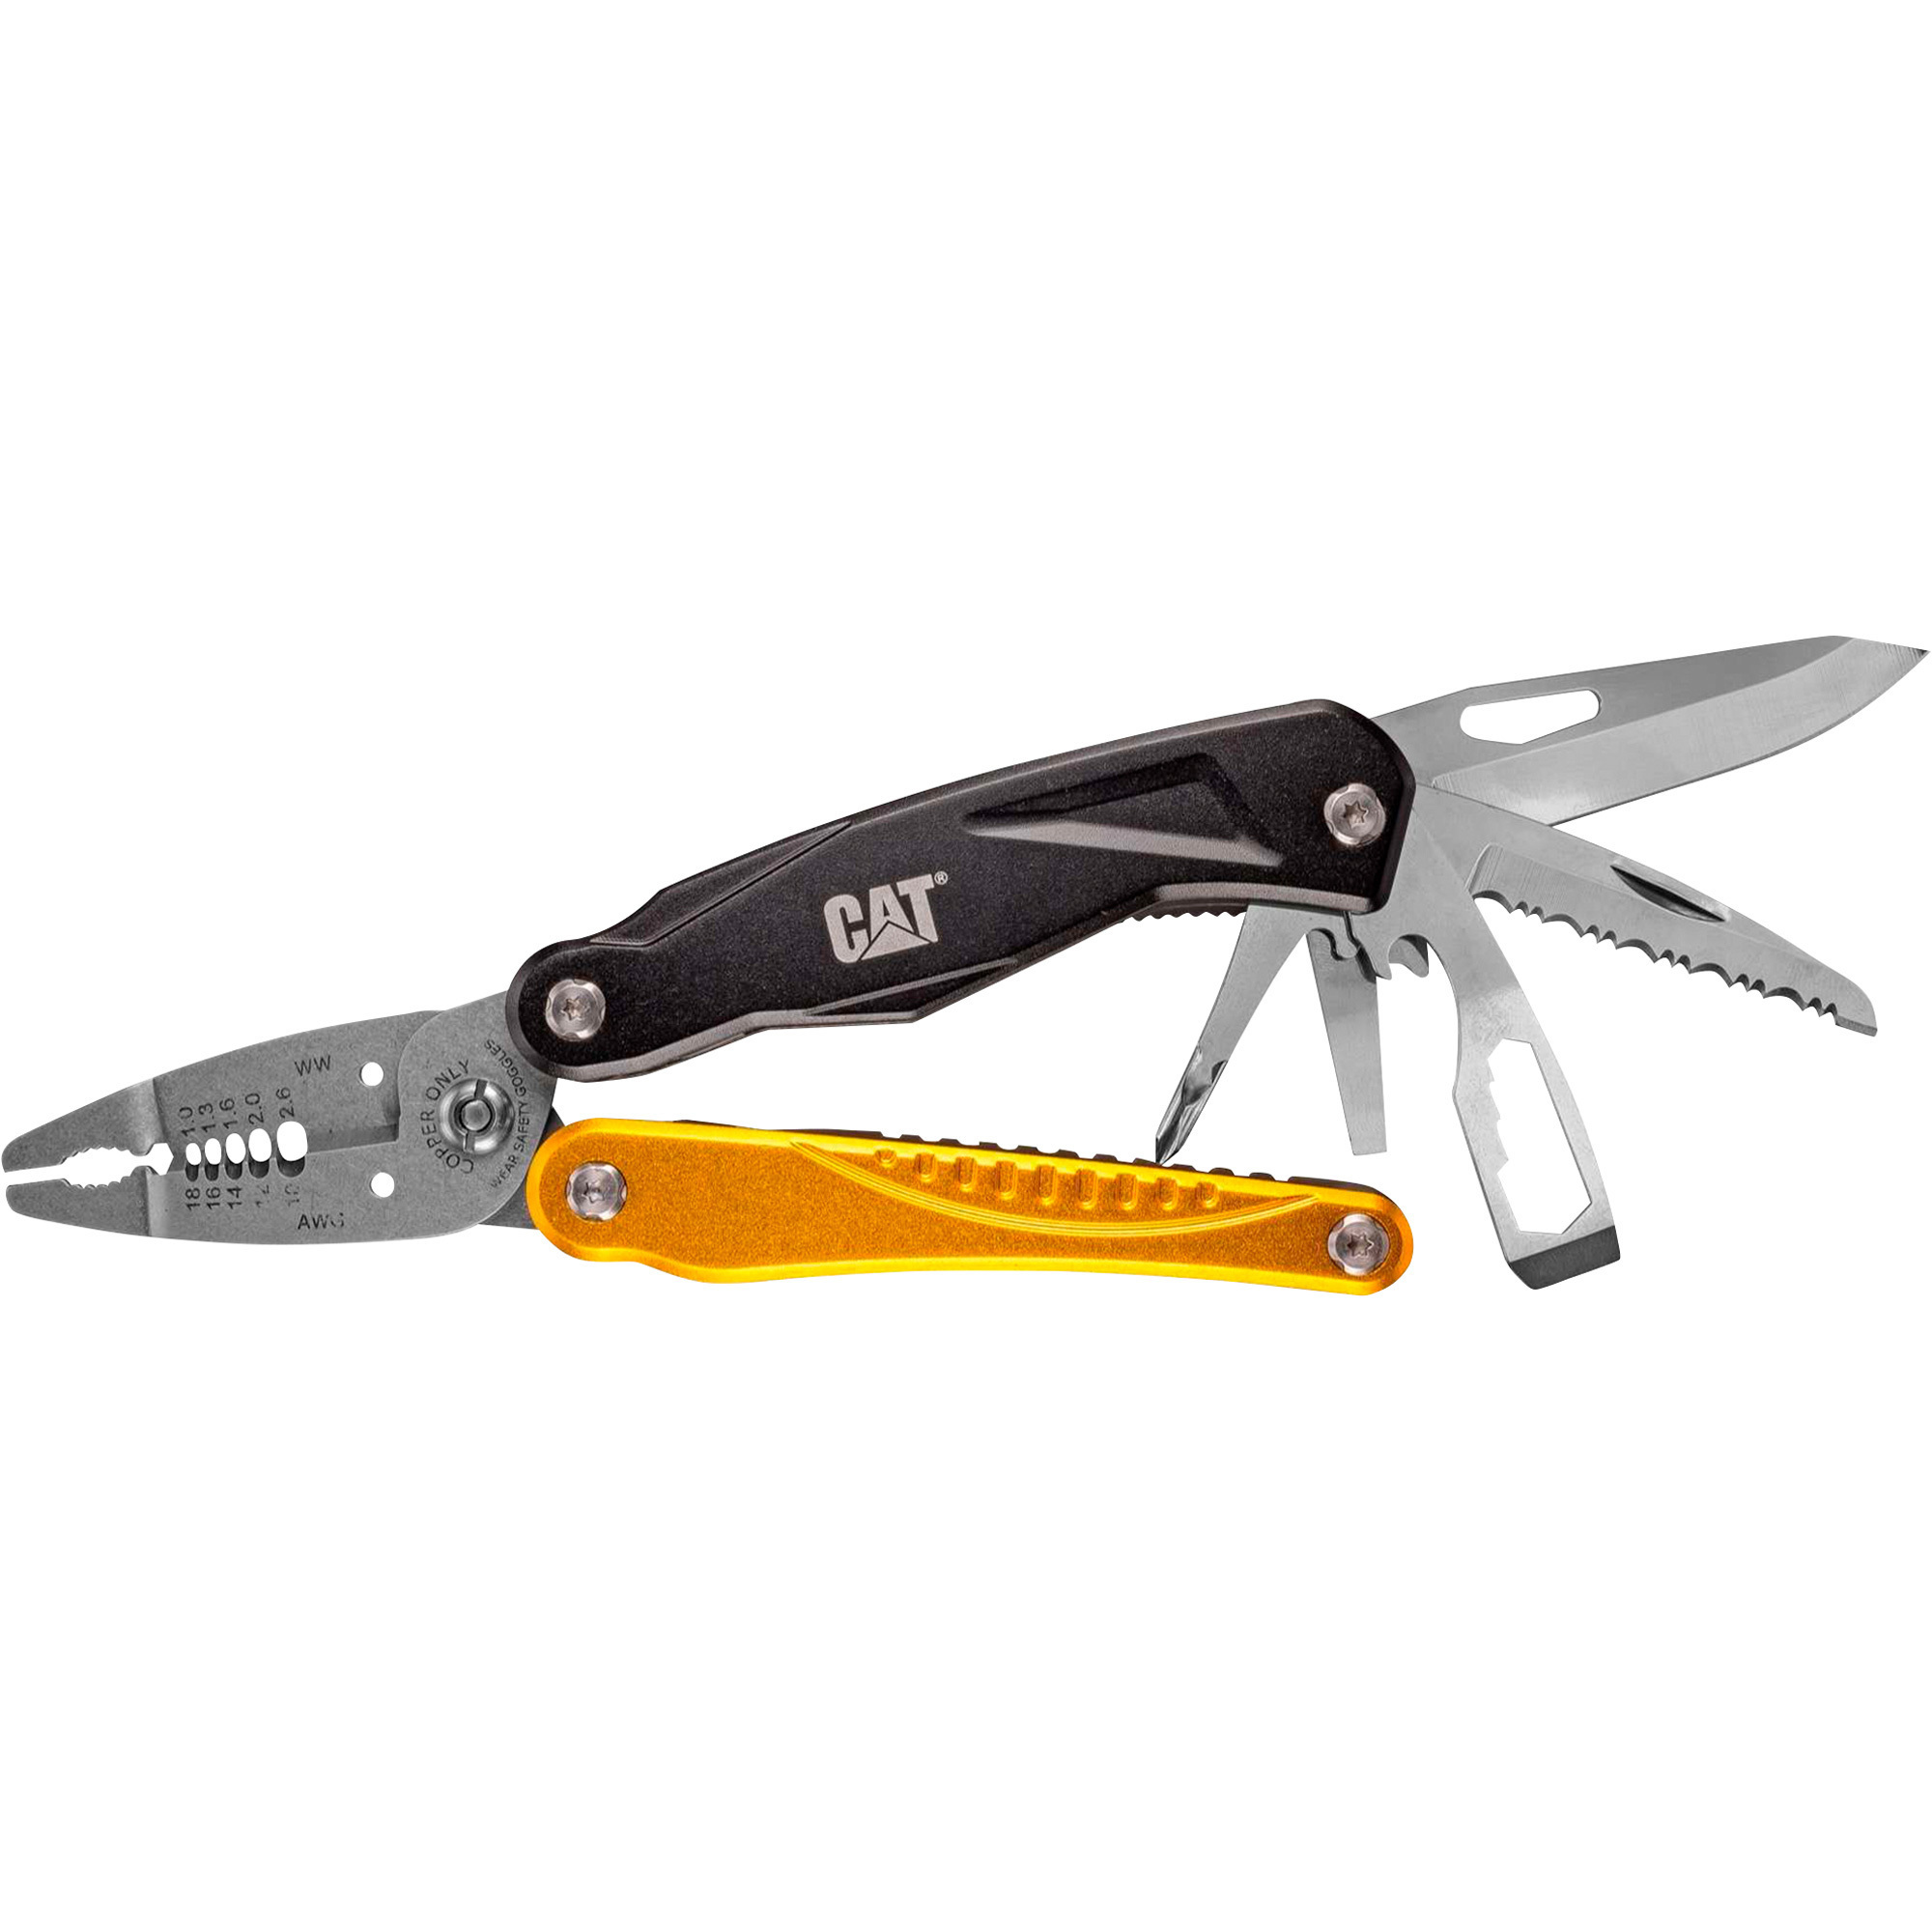 CAT 14-Function Multi-Tool, With Sheath, Model 980104